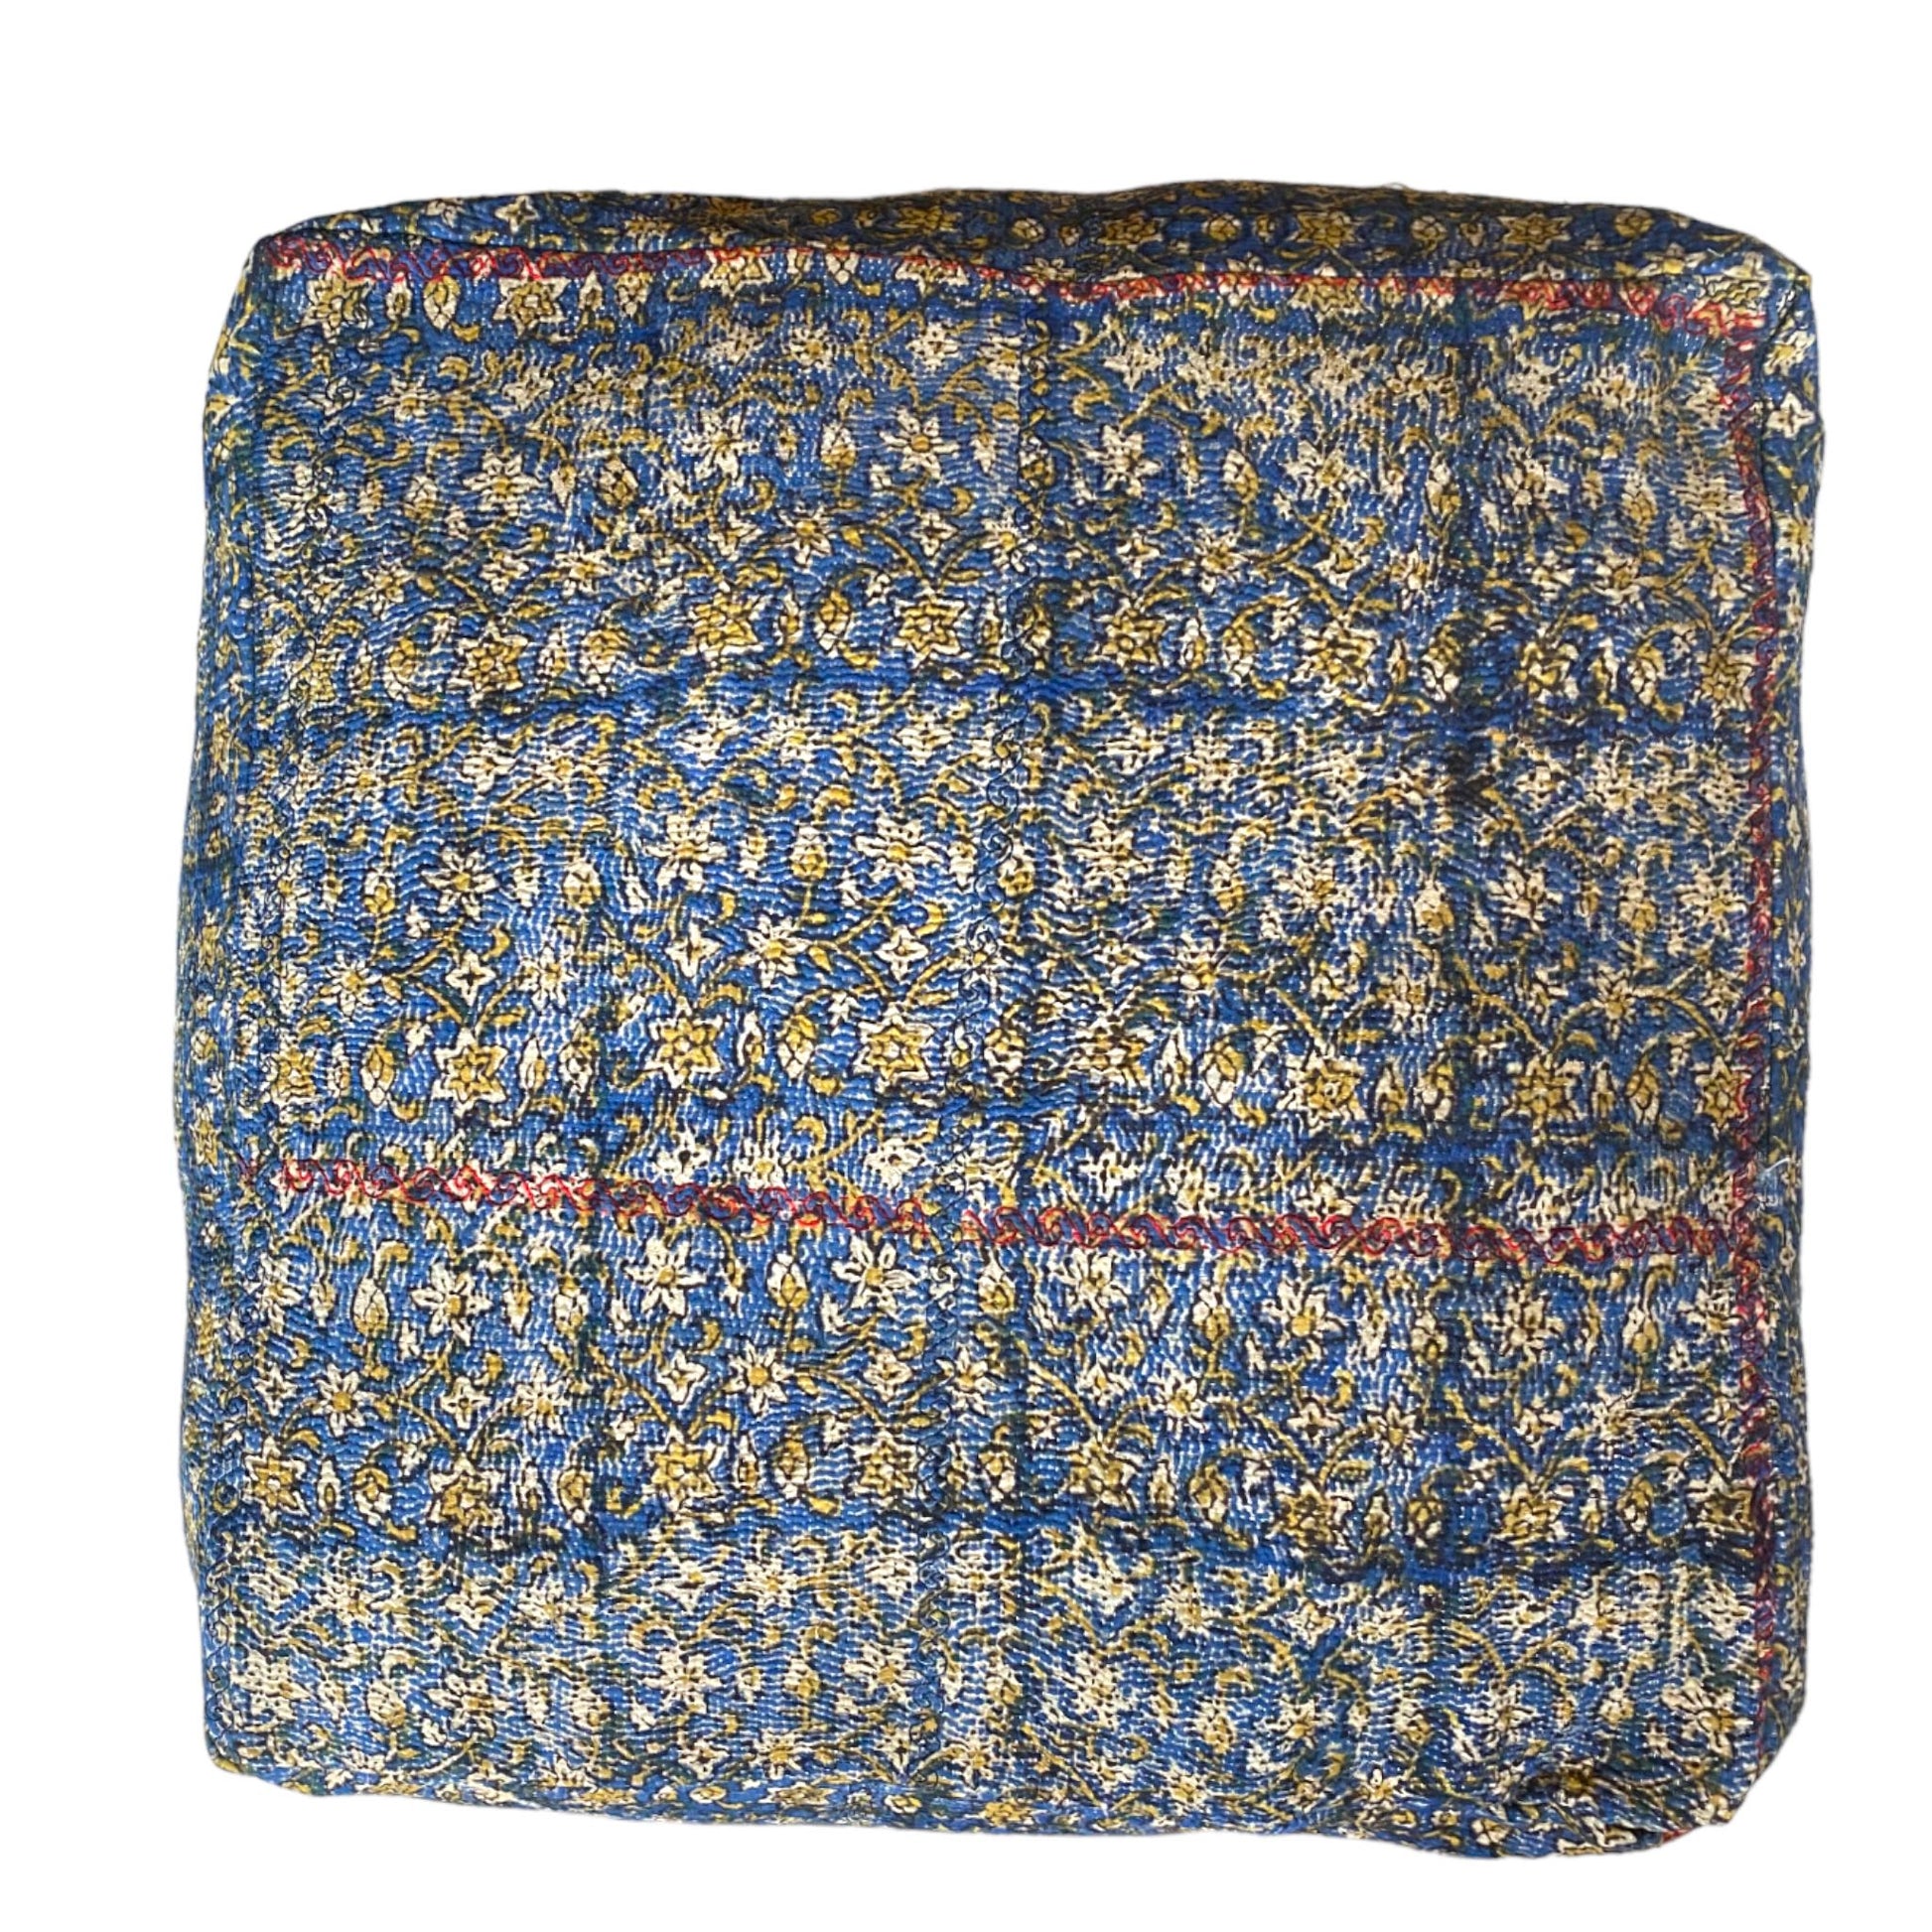 Blue and yellow kantha floor cushion